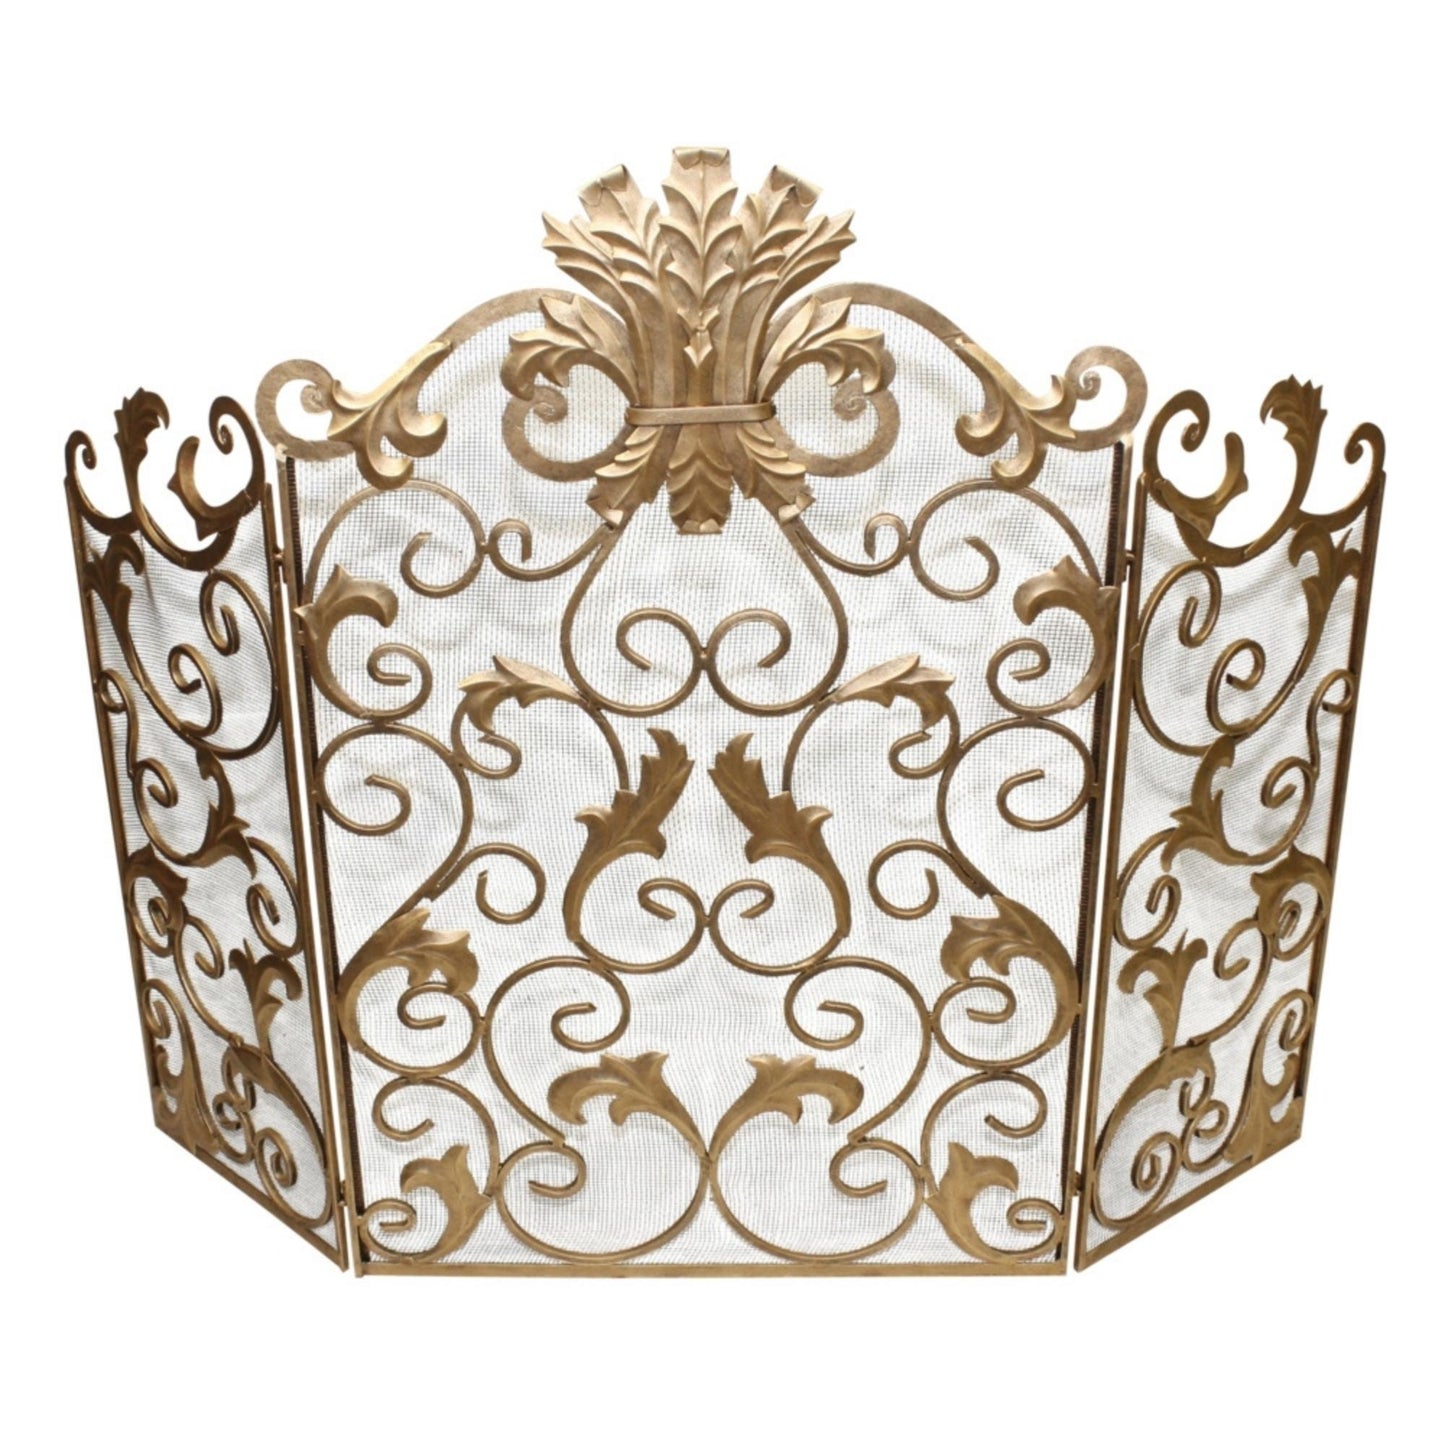 Antique Gold Acanthus Leaf Ornate Fire Screen - Three Panel Fireplace Screen with Mesh | INSIDE OUT | InsideOutCatalog.com